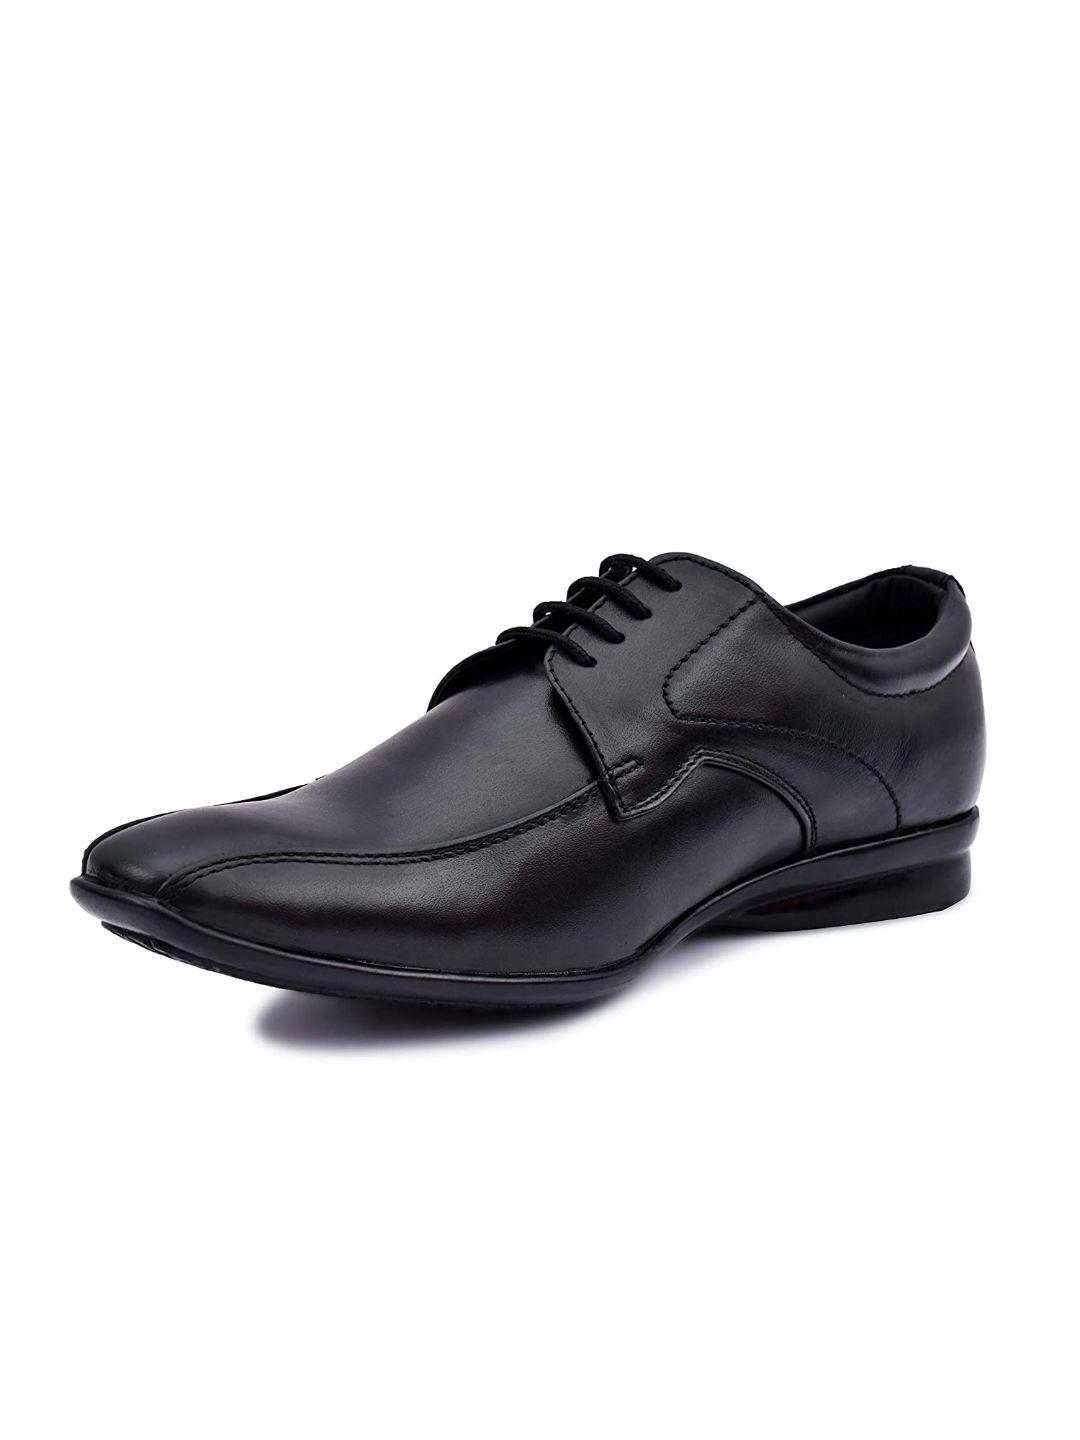 Maeve & Shelby Men's Formal Office Wear Shiny Shoes 